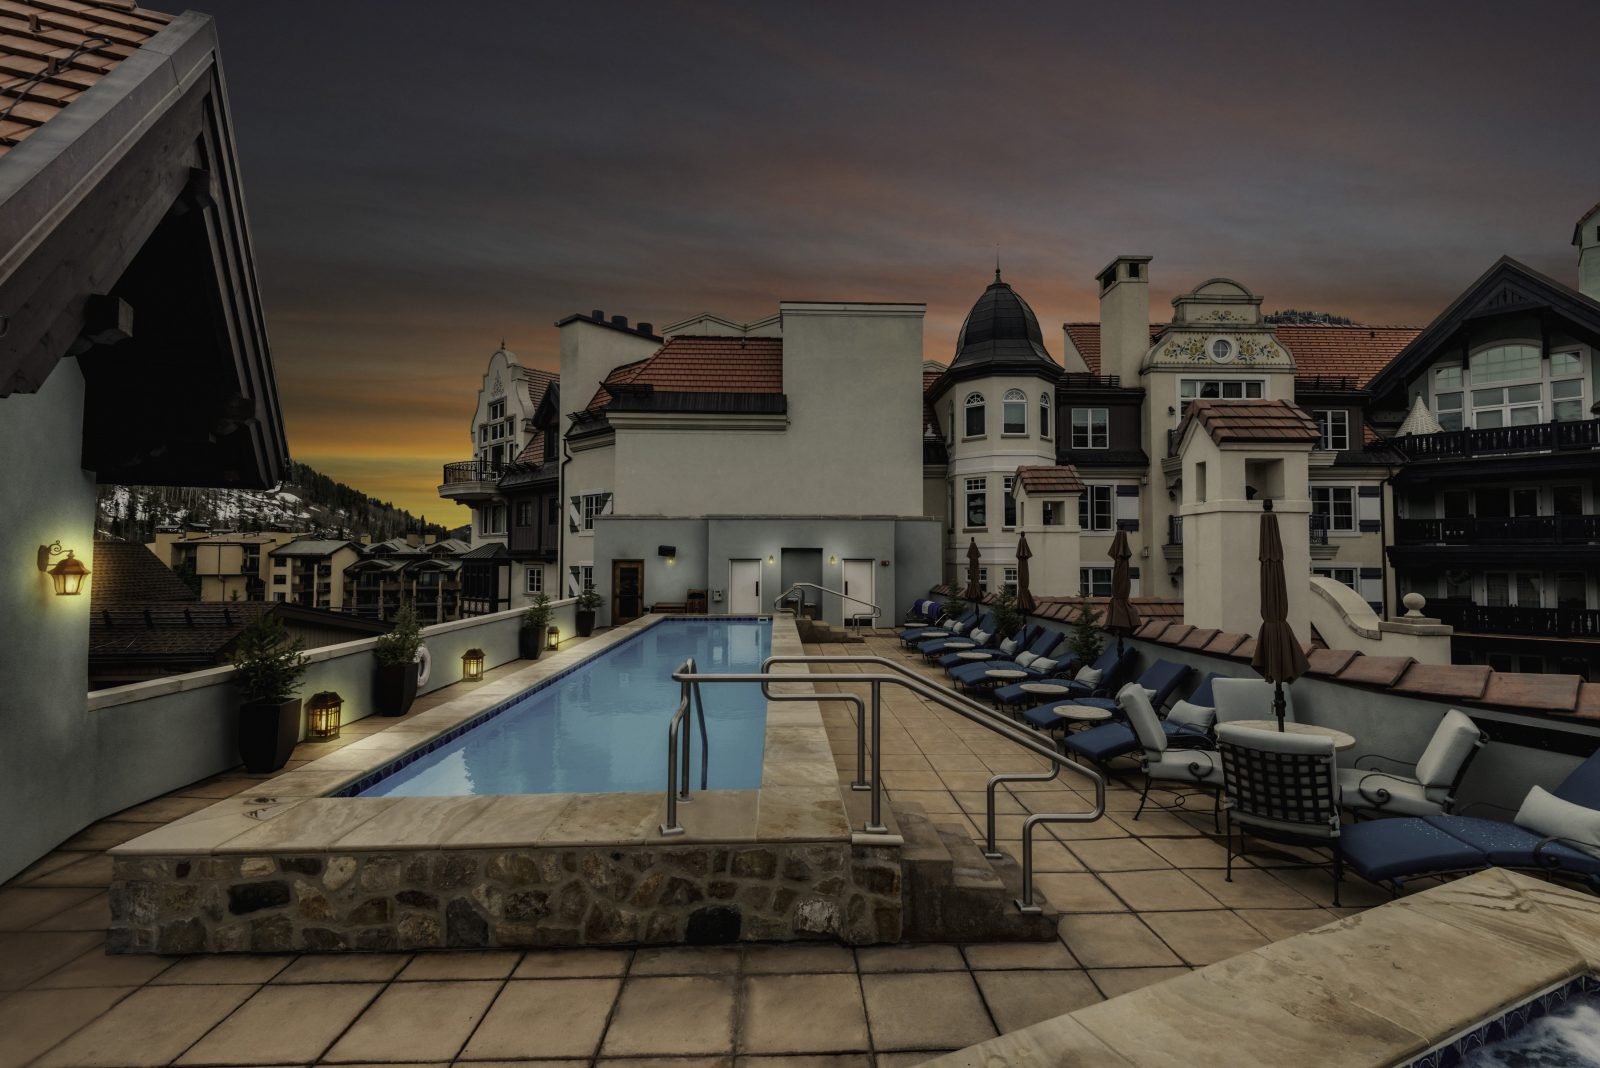 Rooftop pool during sunset at The Arrabelle in Vail, CO. Photo: Charles Toownsend. Vail Resorts. The Must-Read Guide to Vail.